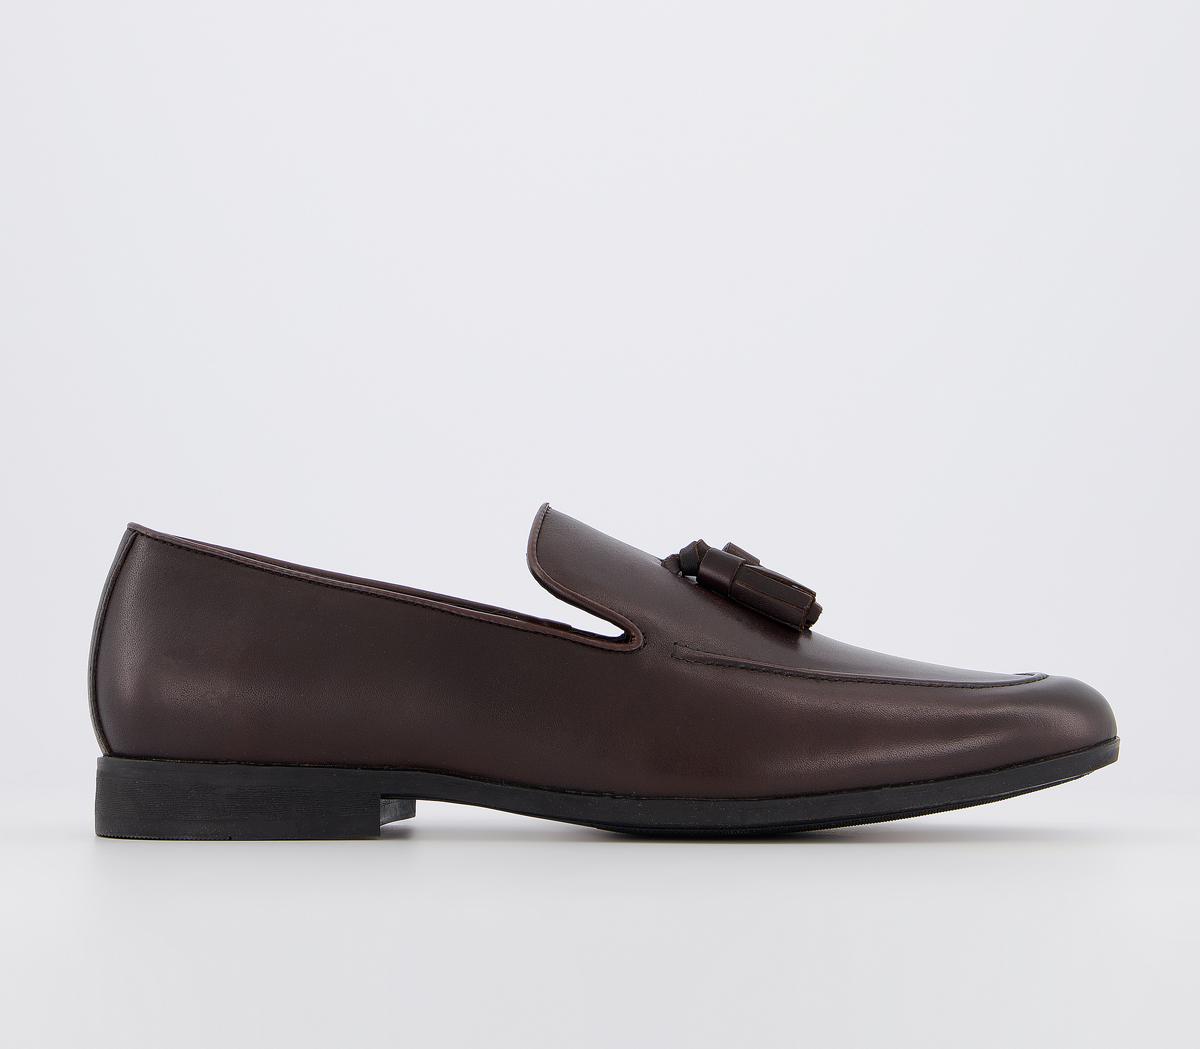 OFFICEManage Tassel LoafersBrown Leather